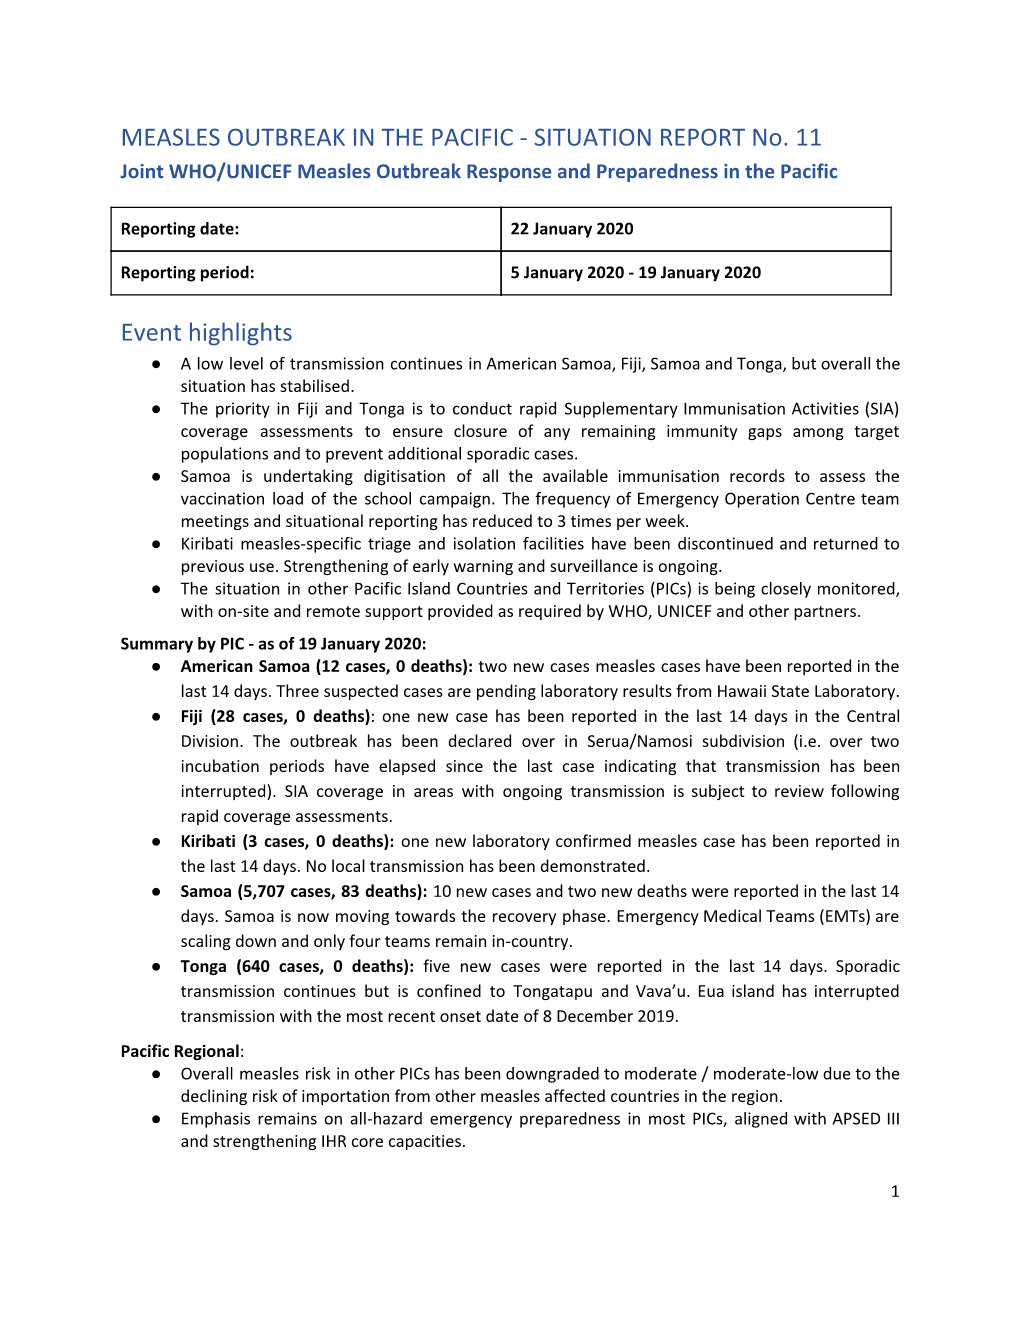 MEASLES OUTBREAK in the PACIFIC - SITUATION REPORT No